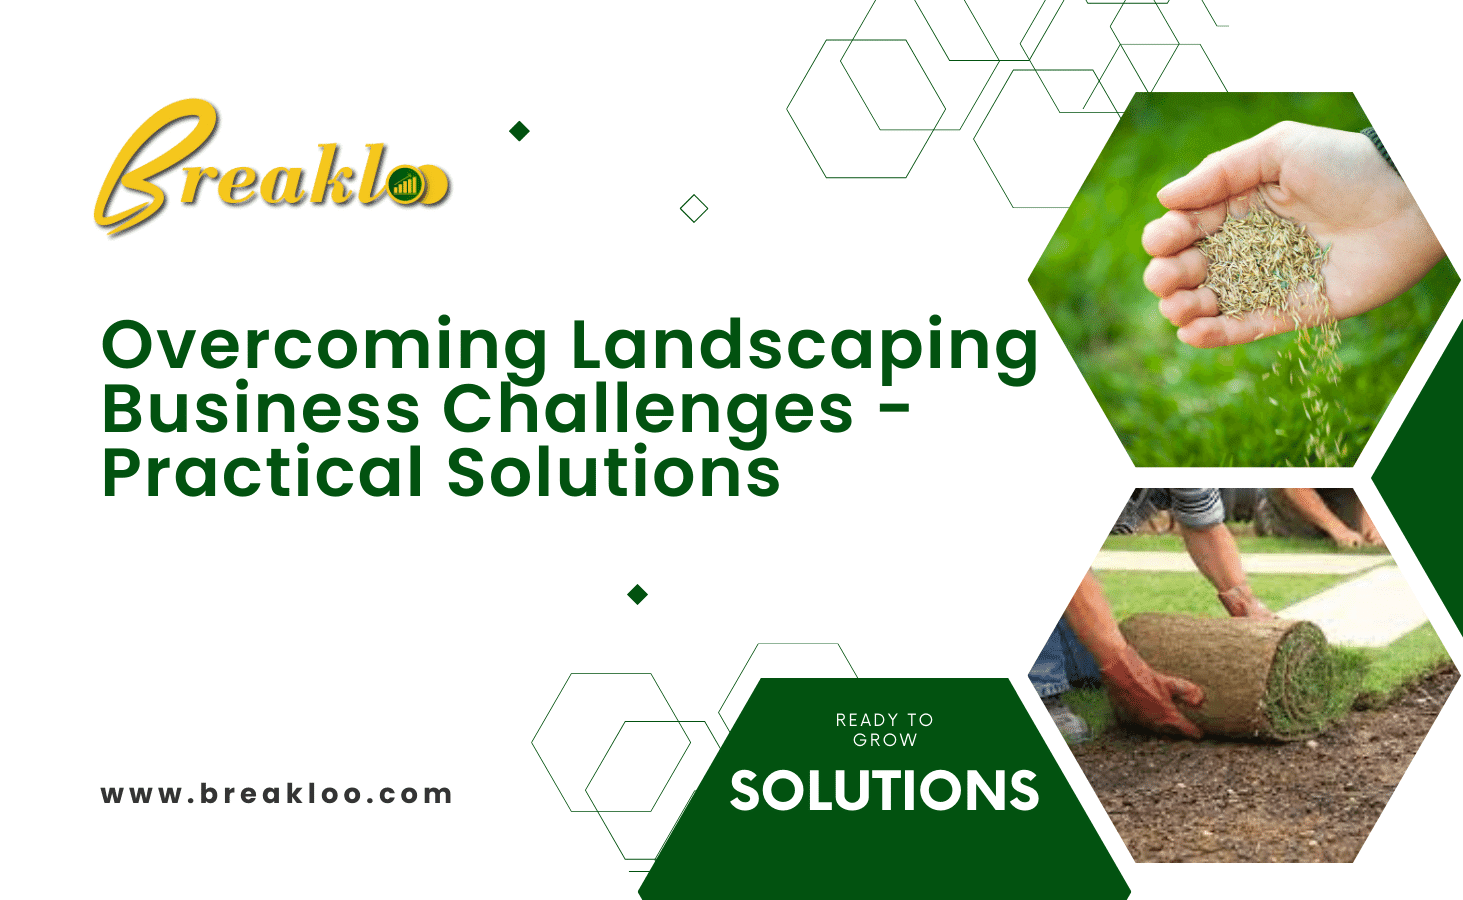 Overcoming Landscaping Business Challenges - Practical Solutions